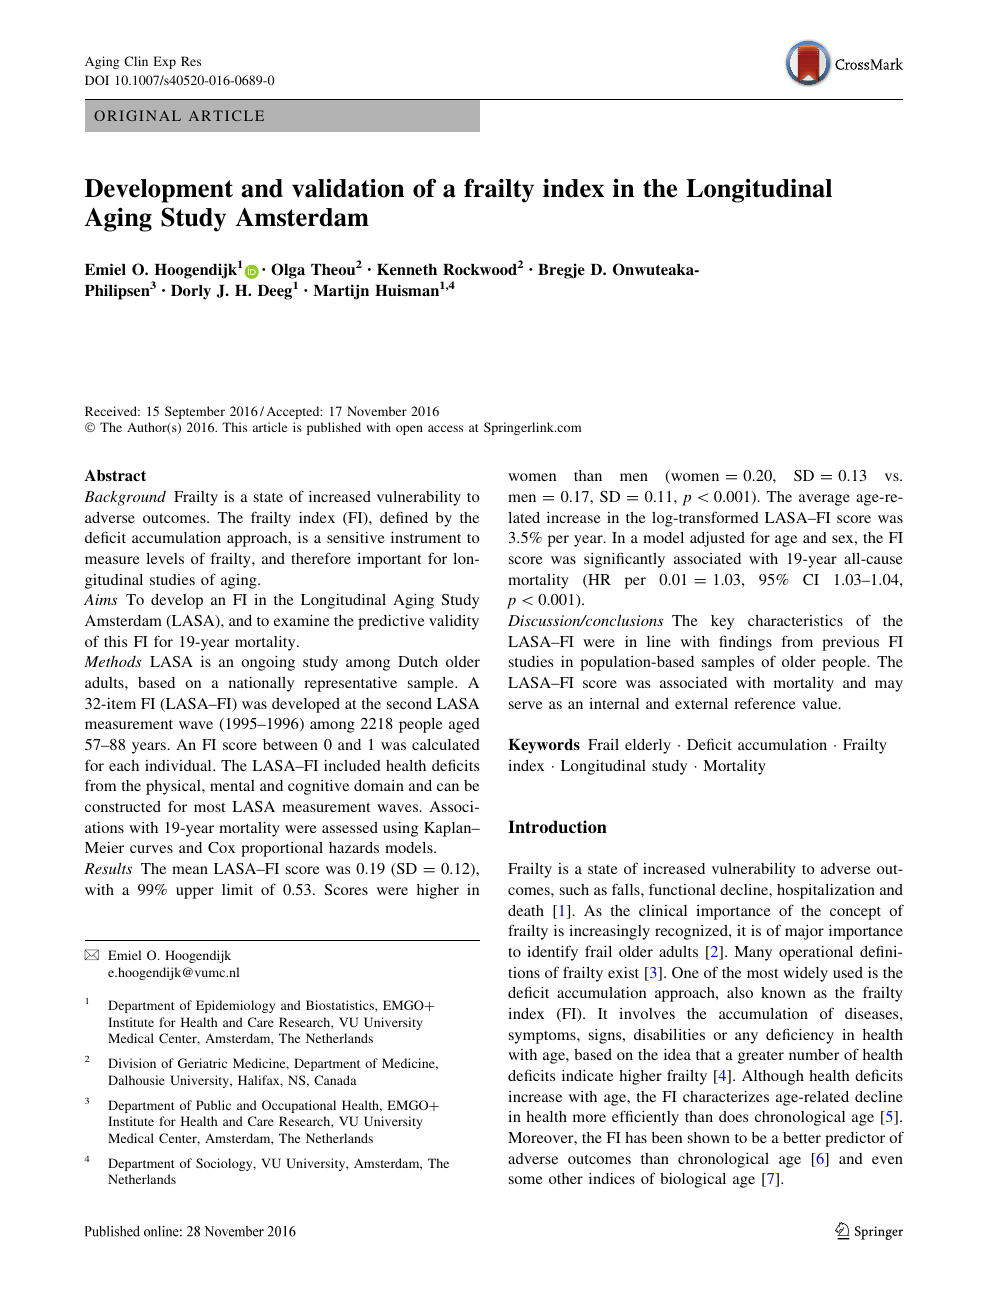 Development And Validation Of A Frailty Index In The Longitudinal Aging Study Amsterdam Topic Of Research Paper In Clinical Medicine Download Scholarly Article Pdf And Read For Free On Cyberleninka Open